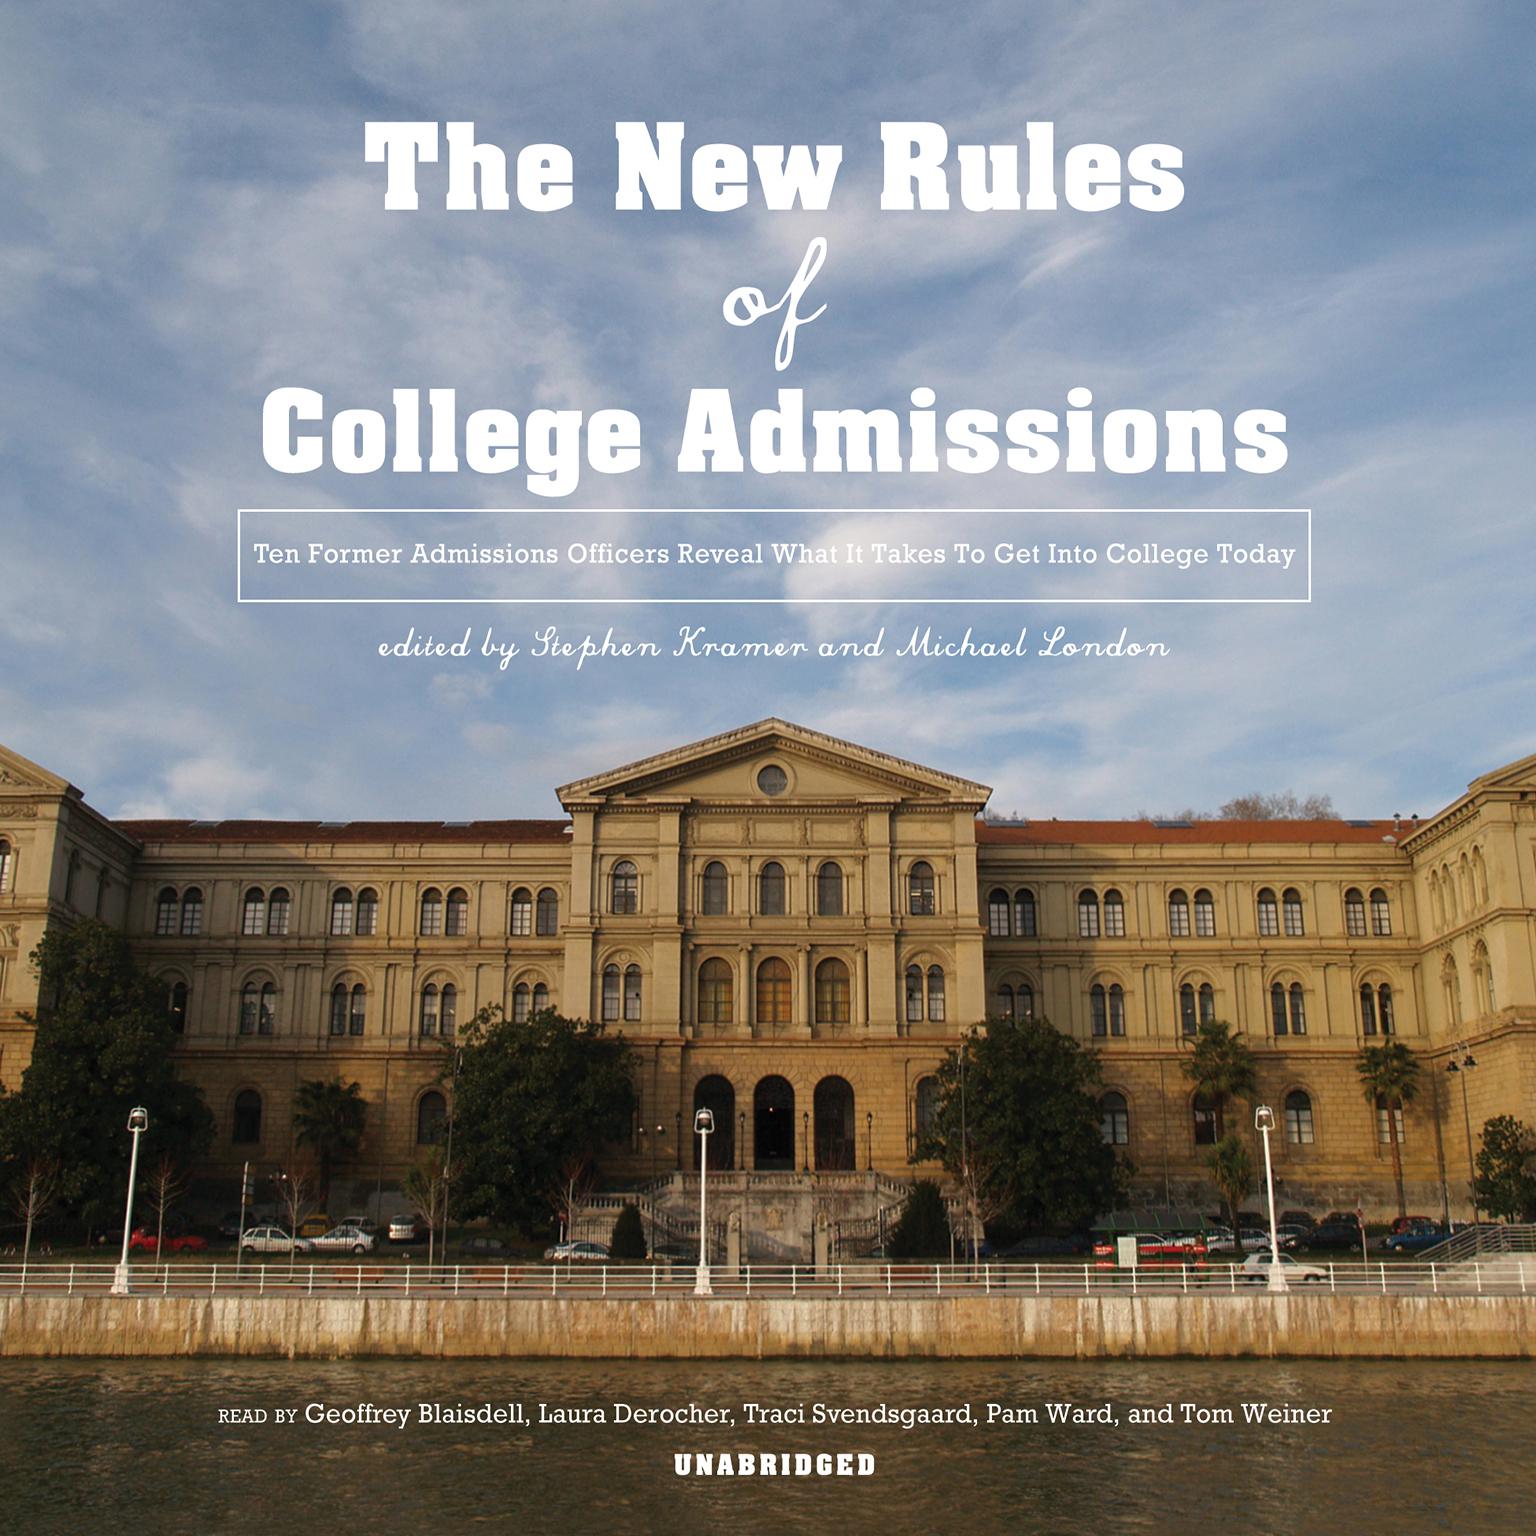 The New Rules of College Admissions: Ten Former Admissions Officers Reveal What It Takes to Get into College Today Audiobook, by Stephen Kramer